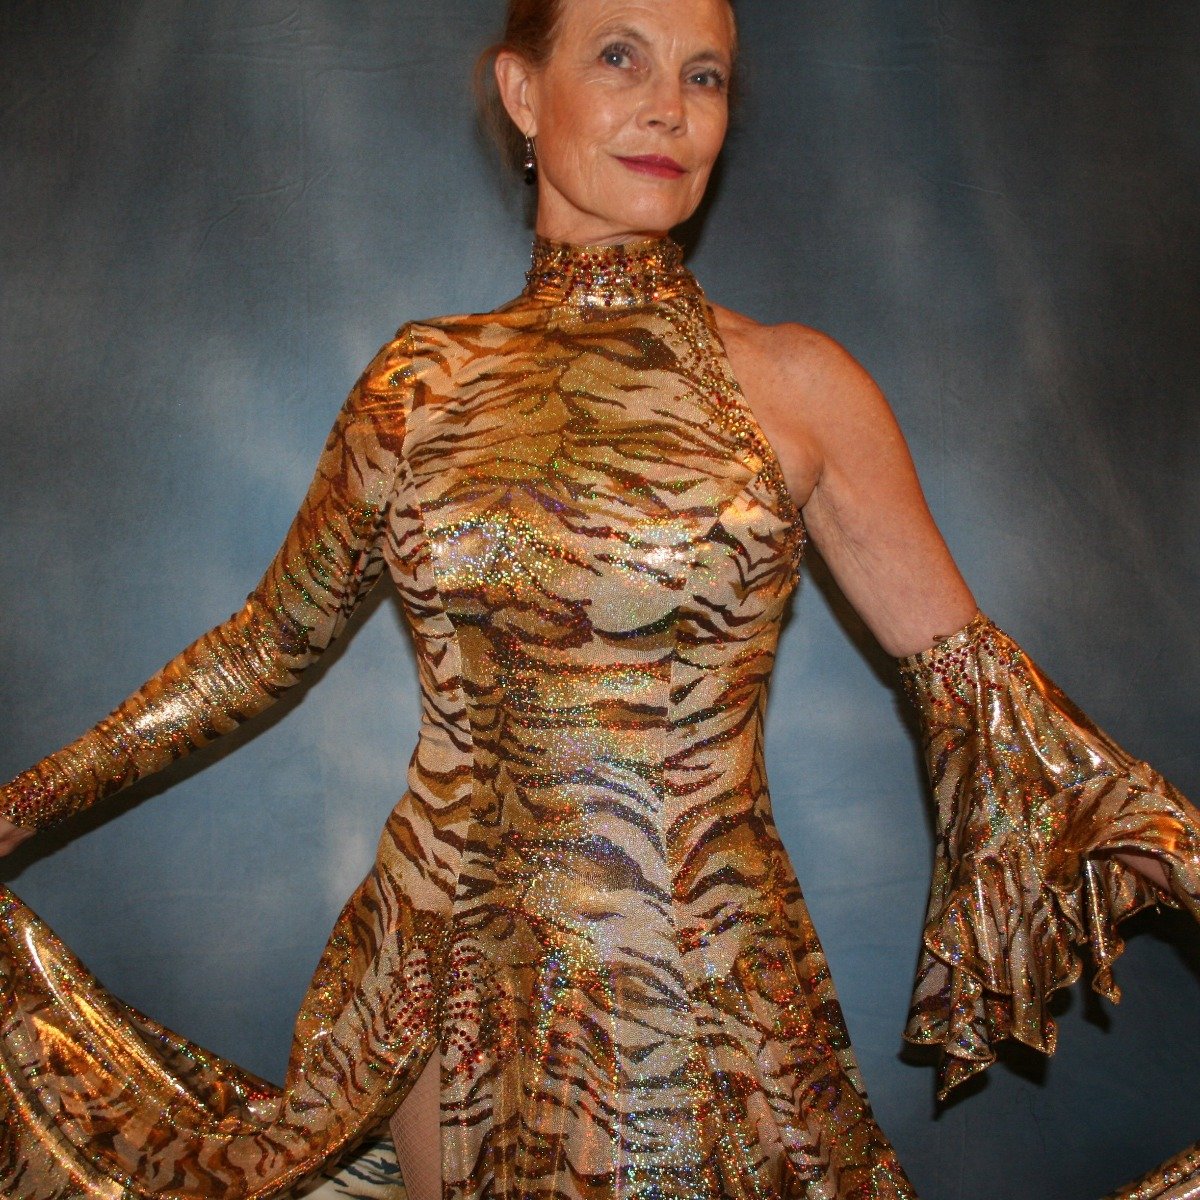 Crystal's Creations close up view of gold hologram tiger print tango dress with many flounces & volcano colored Swarovski rhinestone work size 5/6-9/10